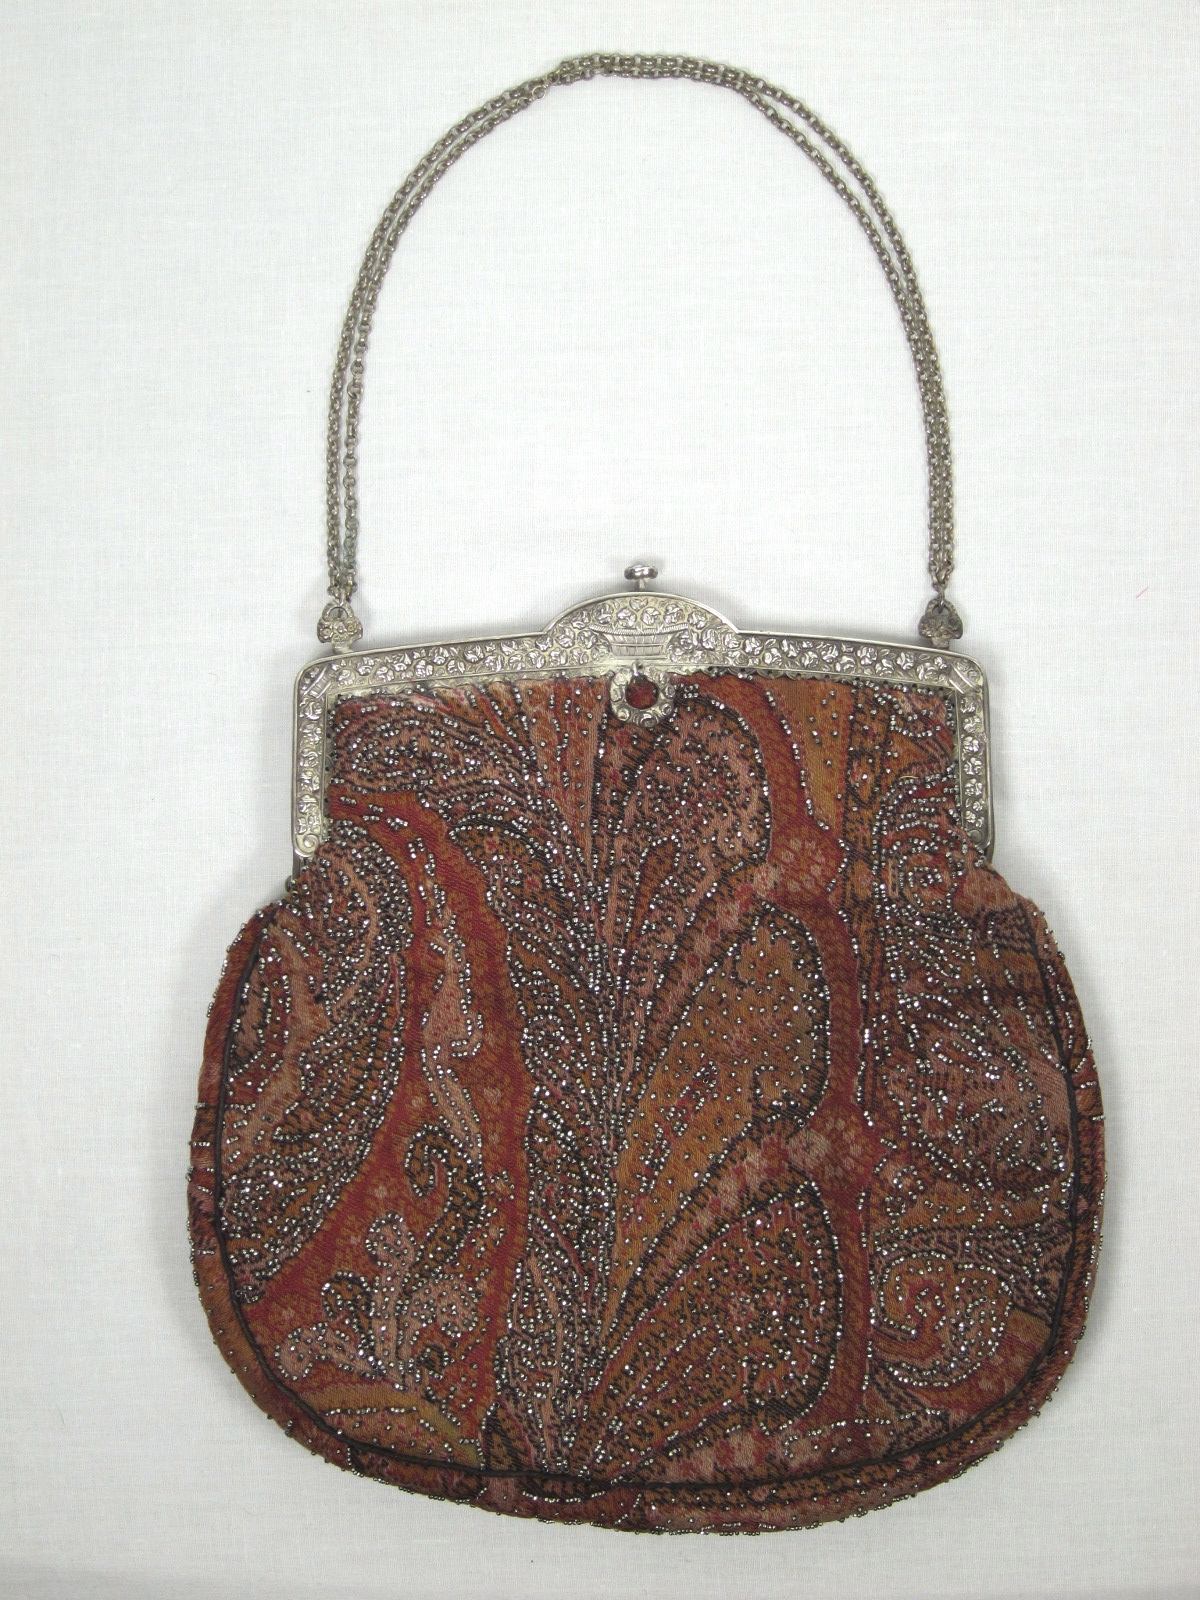 1925 BEADED TAPESTRY PURSE w MIRROR For Sale | Antiques.com | Classifieds